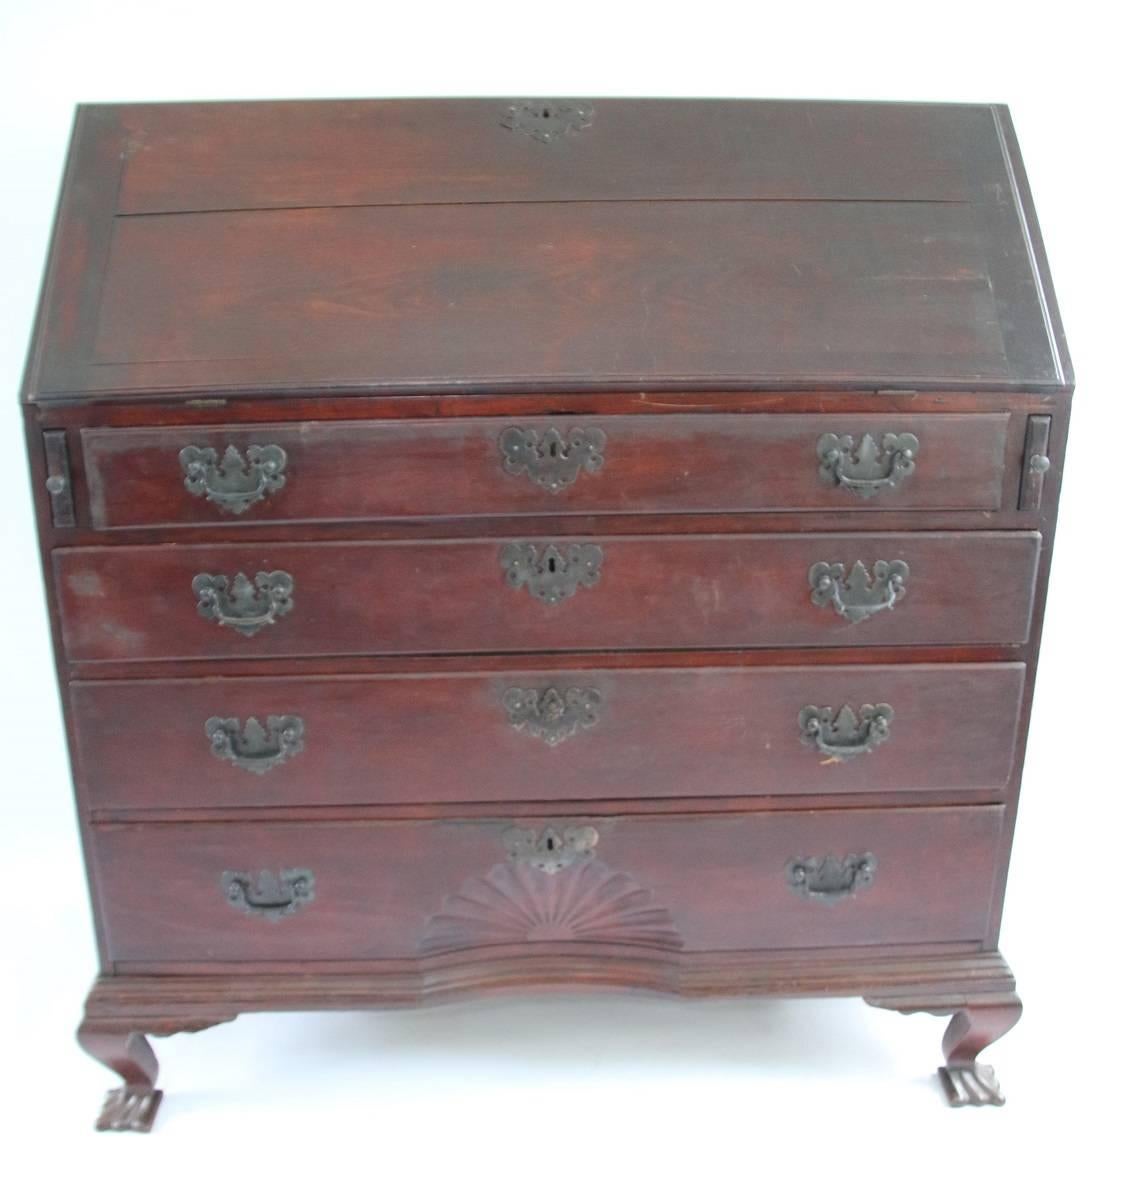 The Beard Family Queen Anne Connecticut slant front desk attributed to Ebenezer Hubbell, having a cherry (front) and sycamore (sides) case in original red stain with black varnish, possessing four graduated drawers. The bottom drawer has a nicely